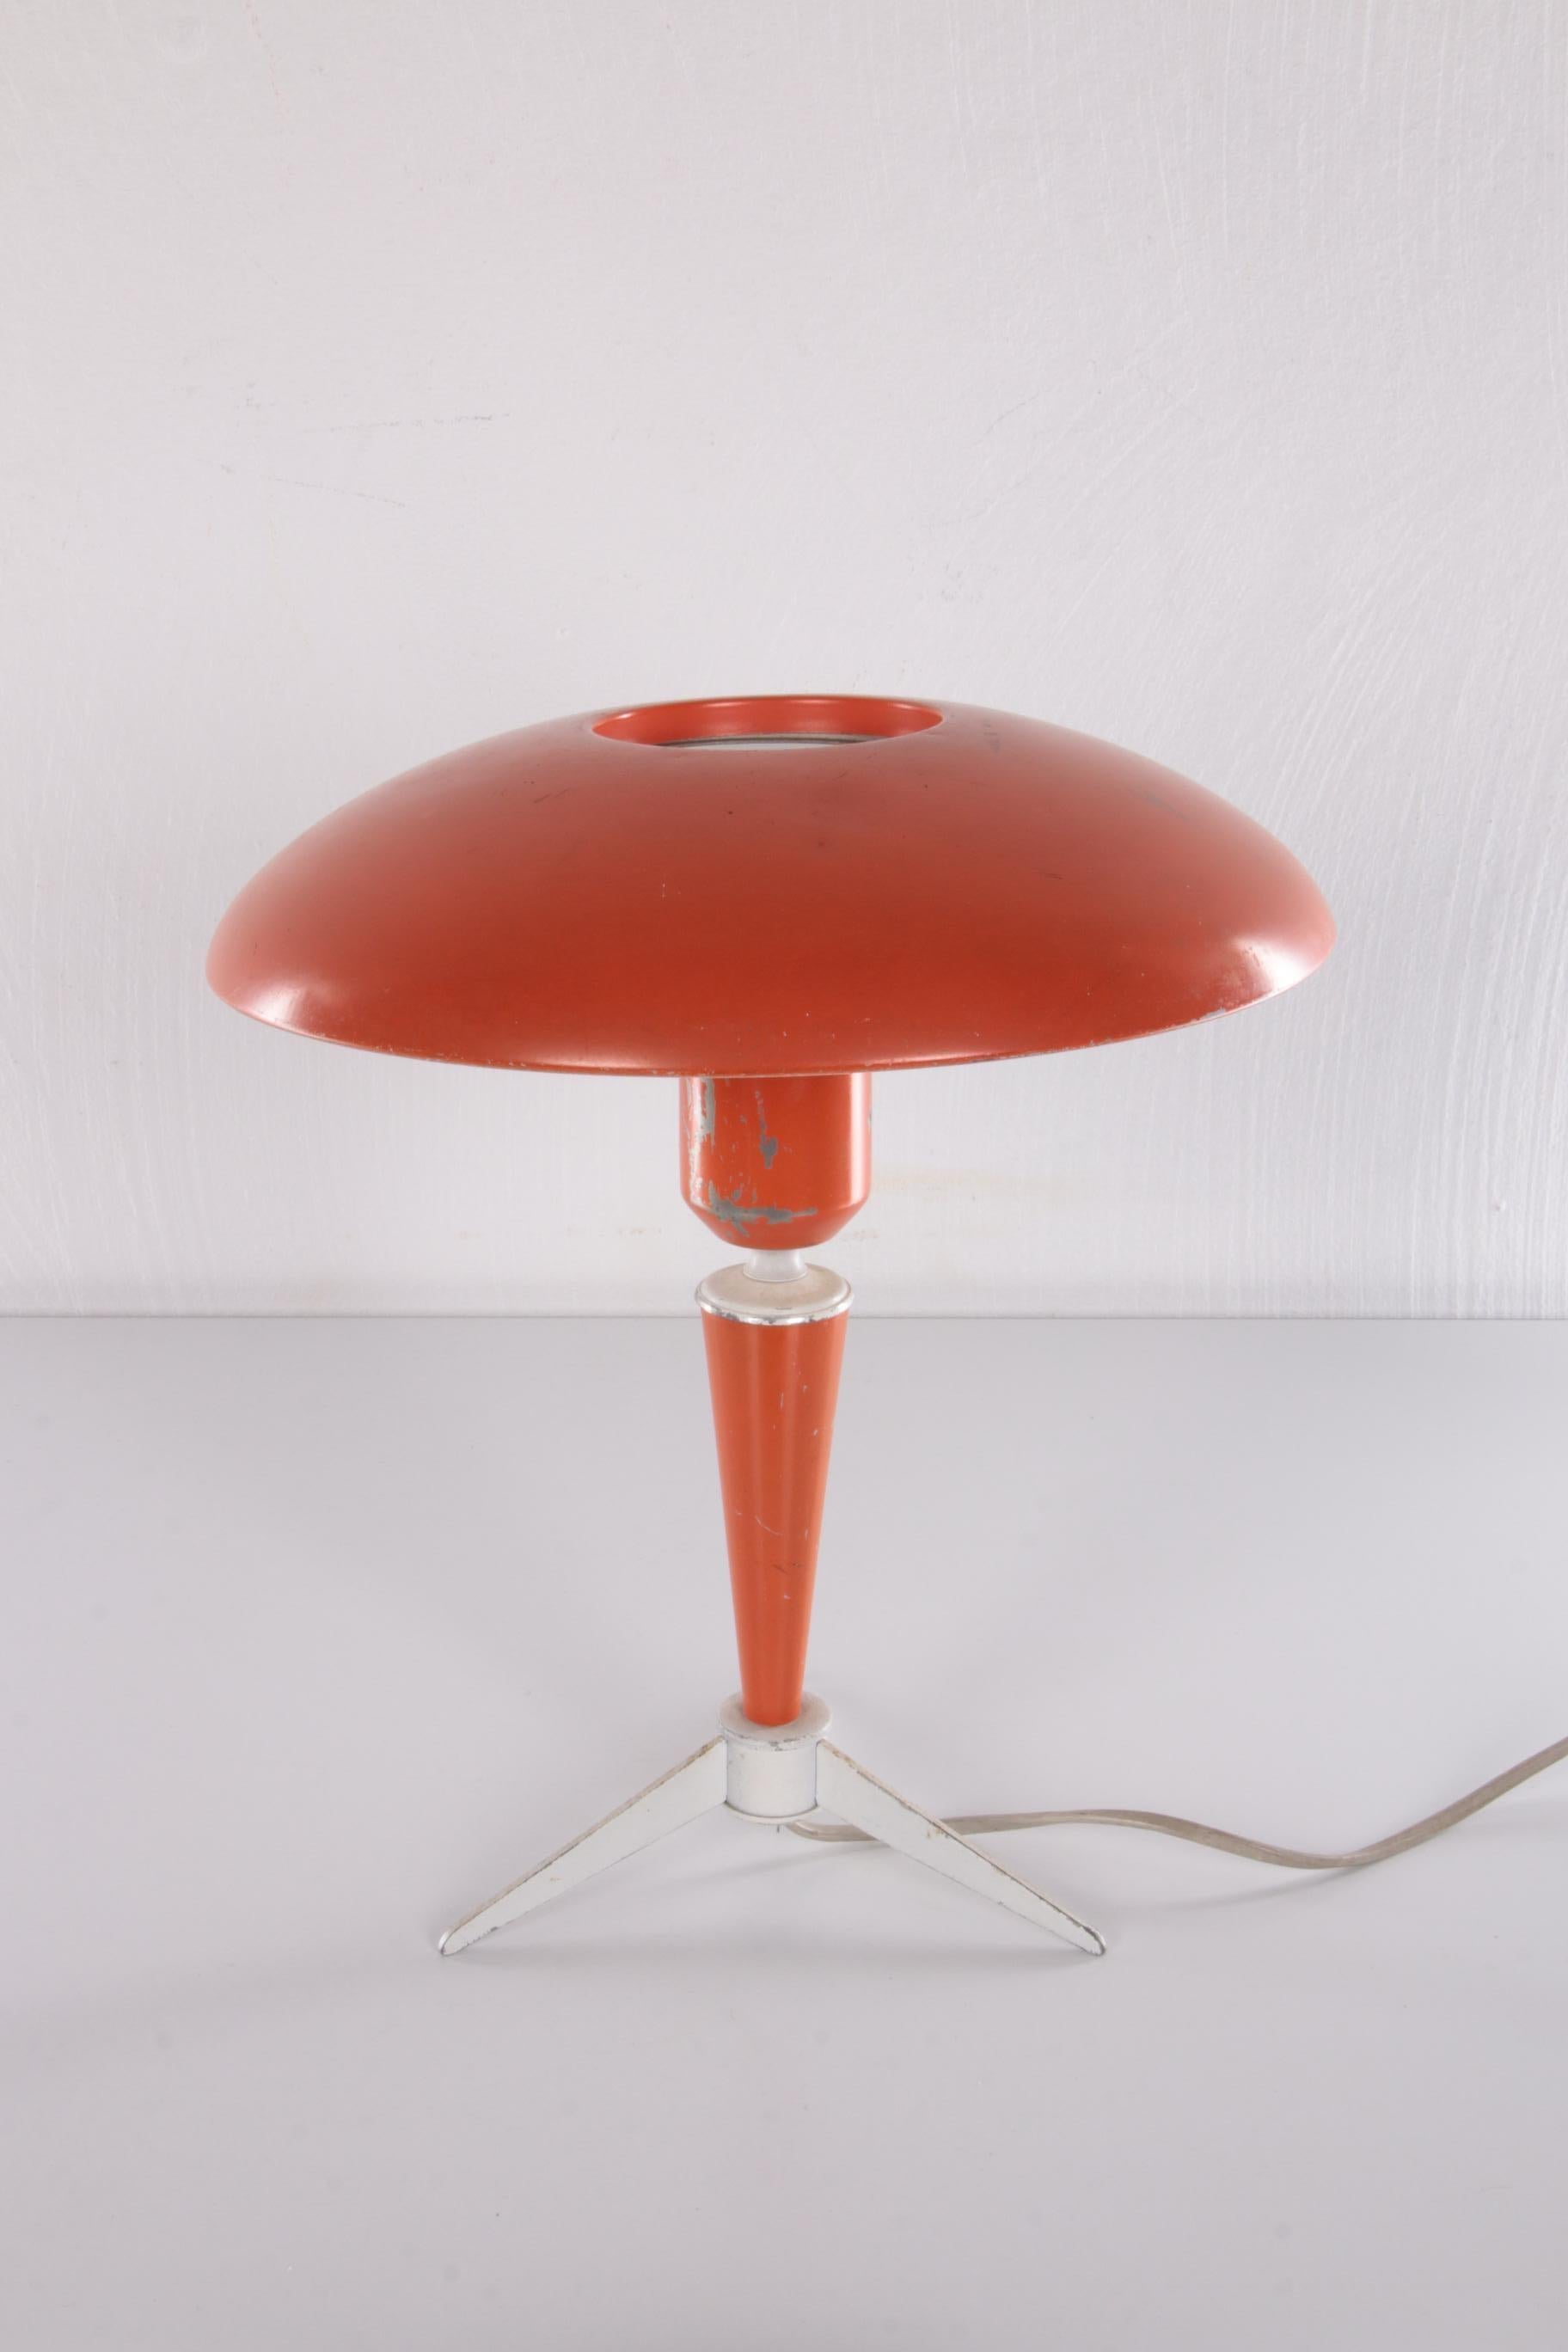 Tripod Table Lamp “Bijou” by Louis Kalff for Philips, 1950s


Tripod table lamp called “Bijou” designed by Louis Kalff for Philips in ca. 1950s.

The shape of this desk lamp is inspired by a UFO. Louis Kalff was an architect and designer and